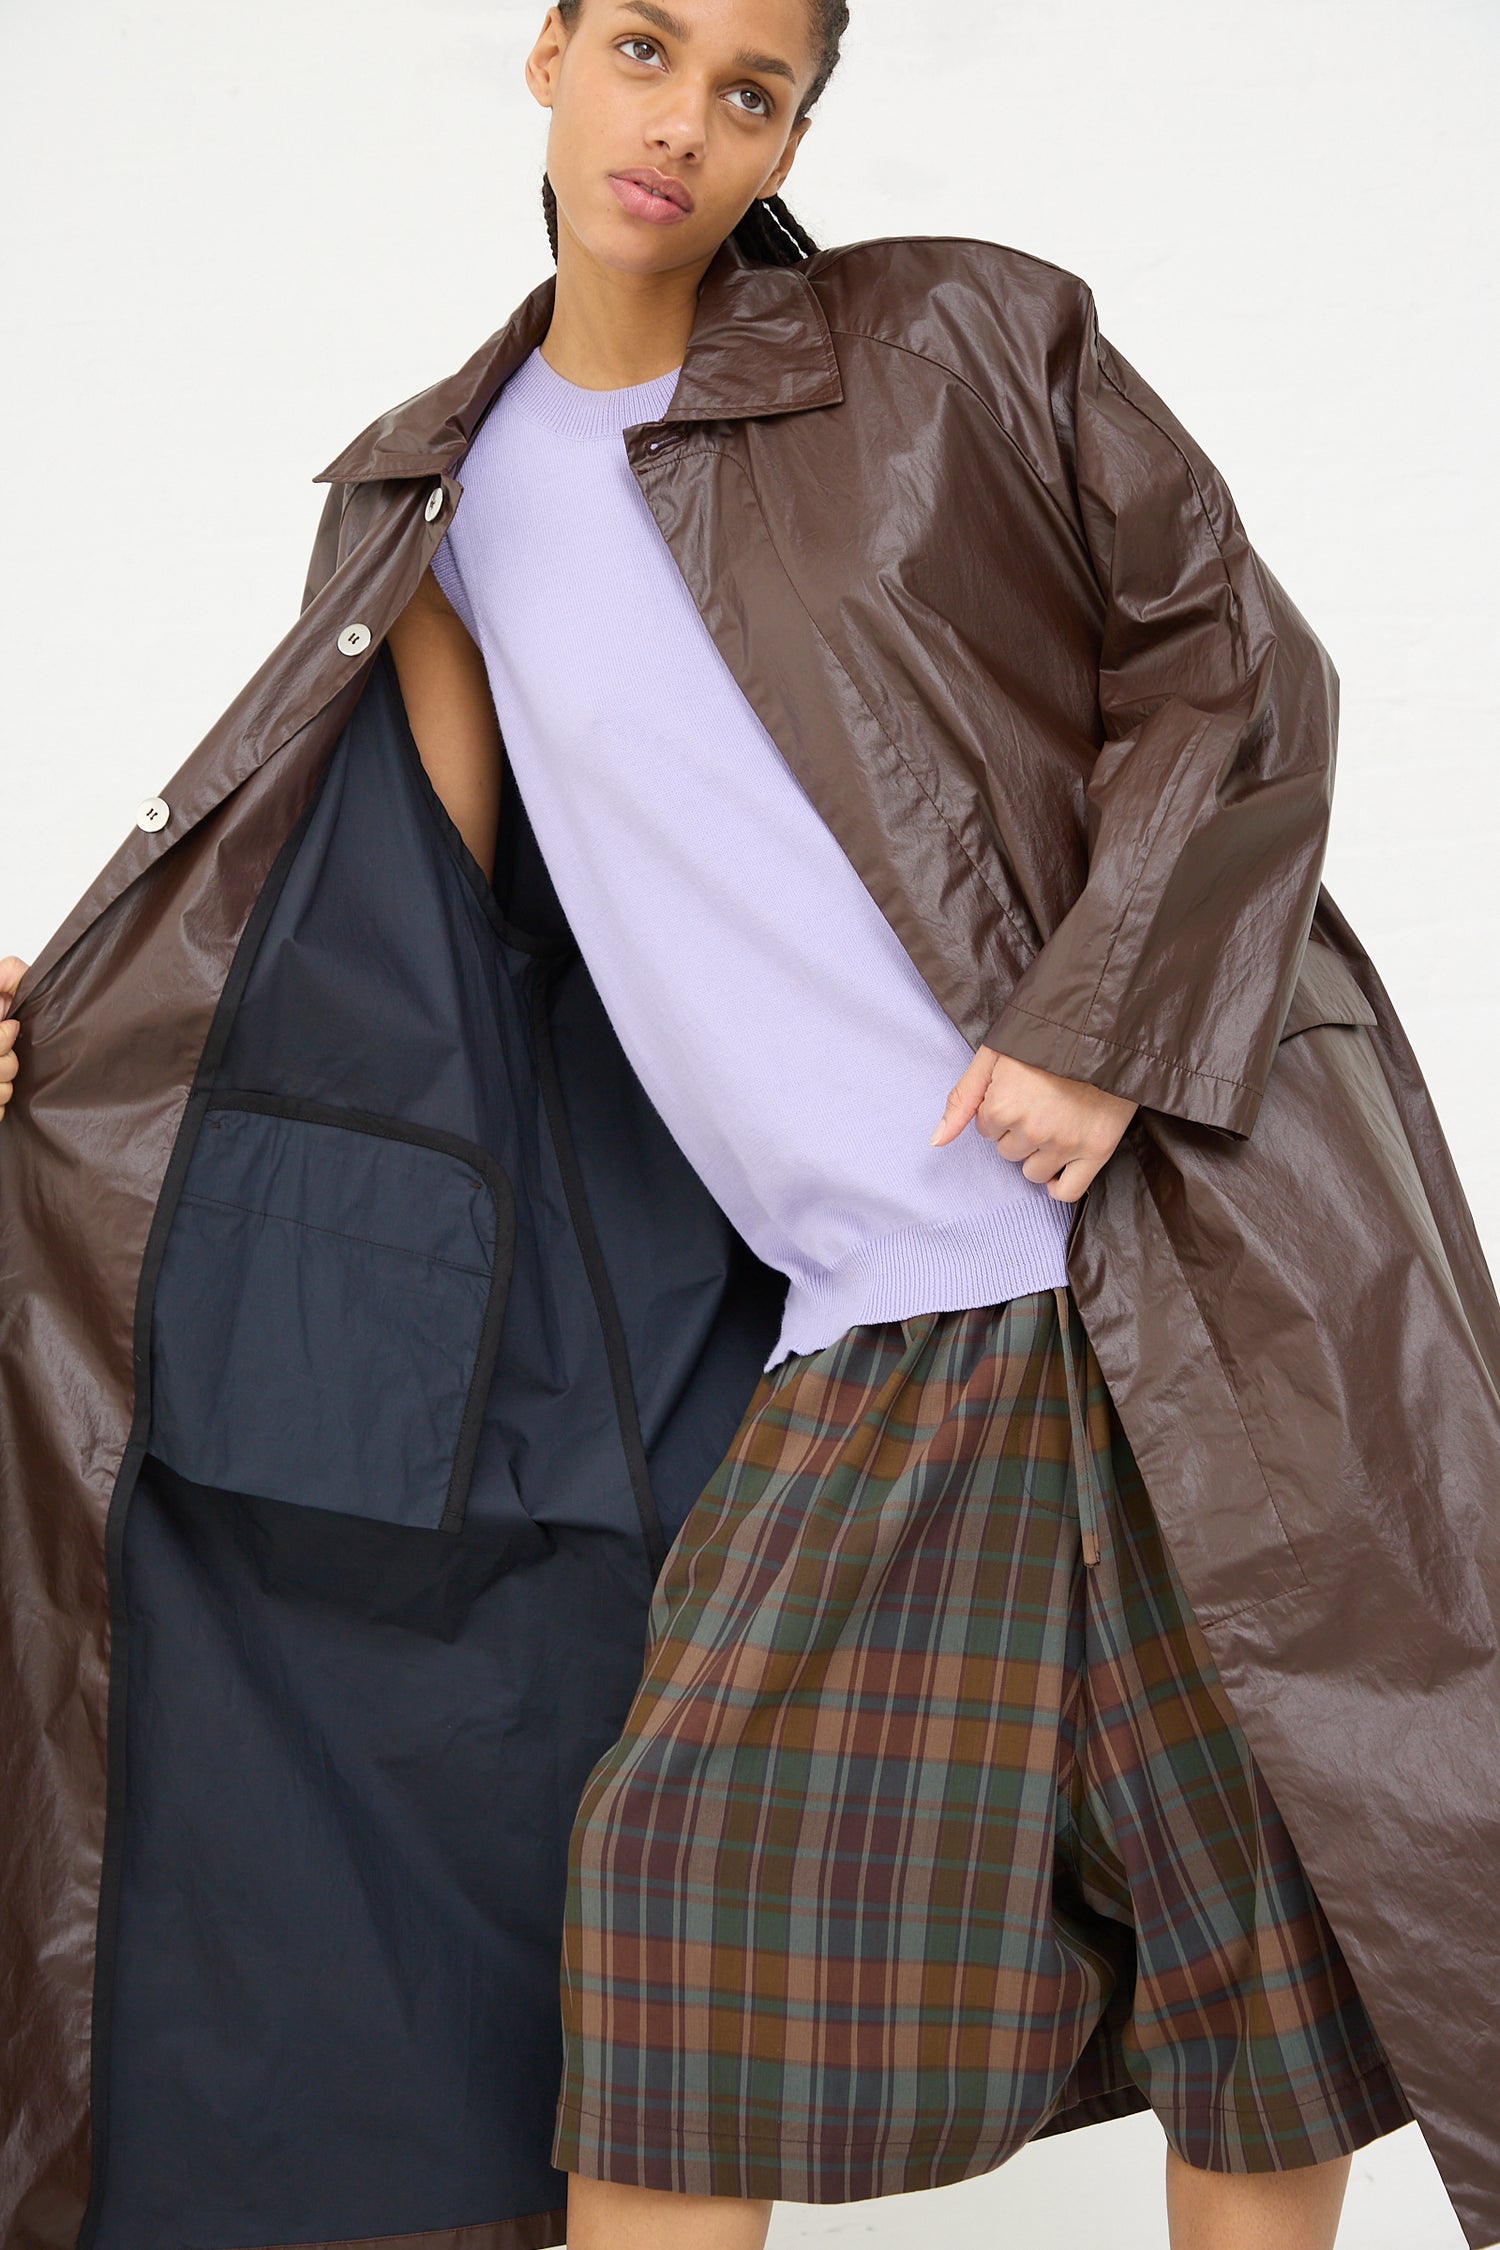 Fashion model showcasing a layered outfit with a purple top, checkered shorts, and an open Cordera Prune Trench Coat.